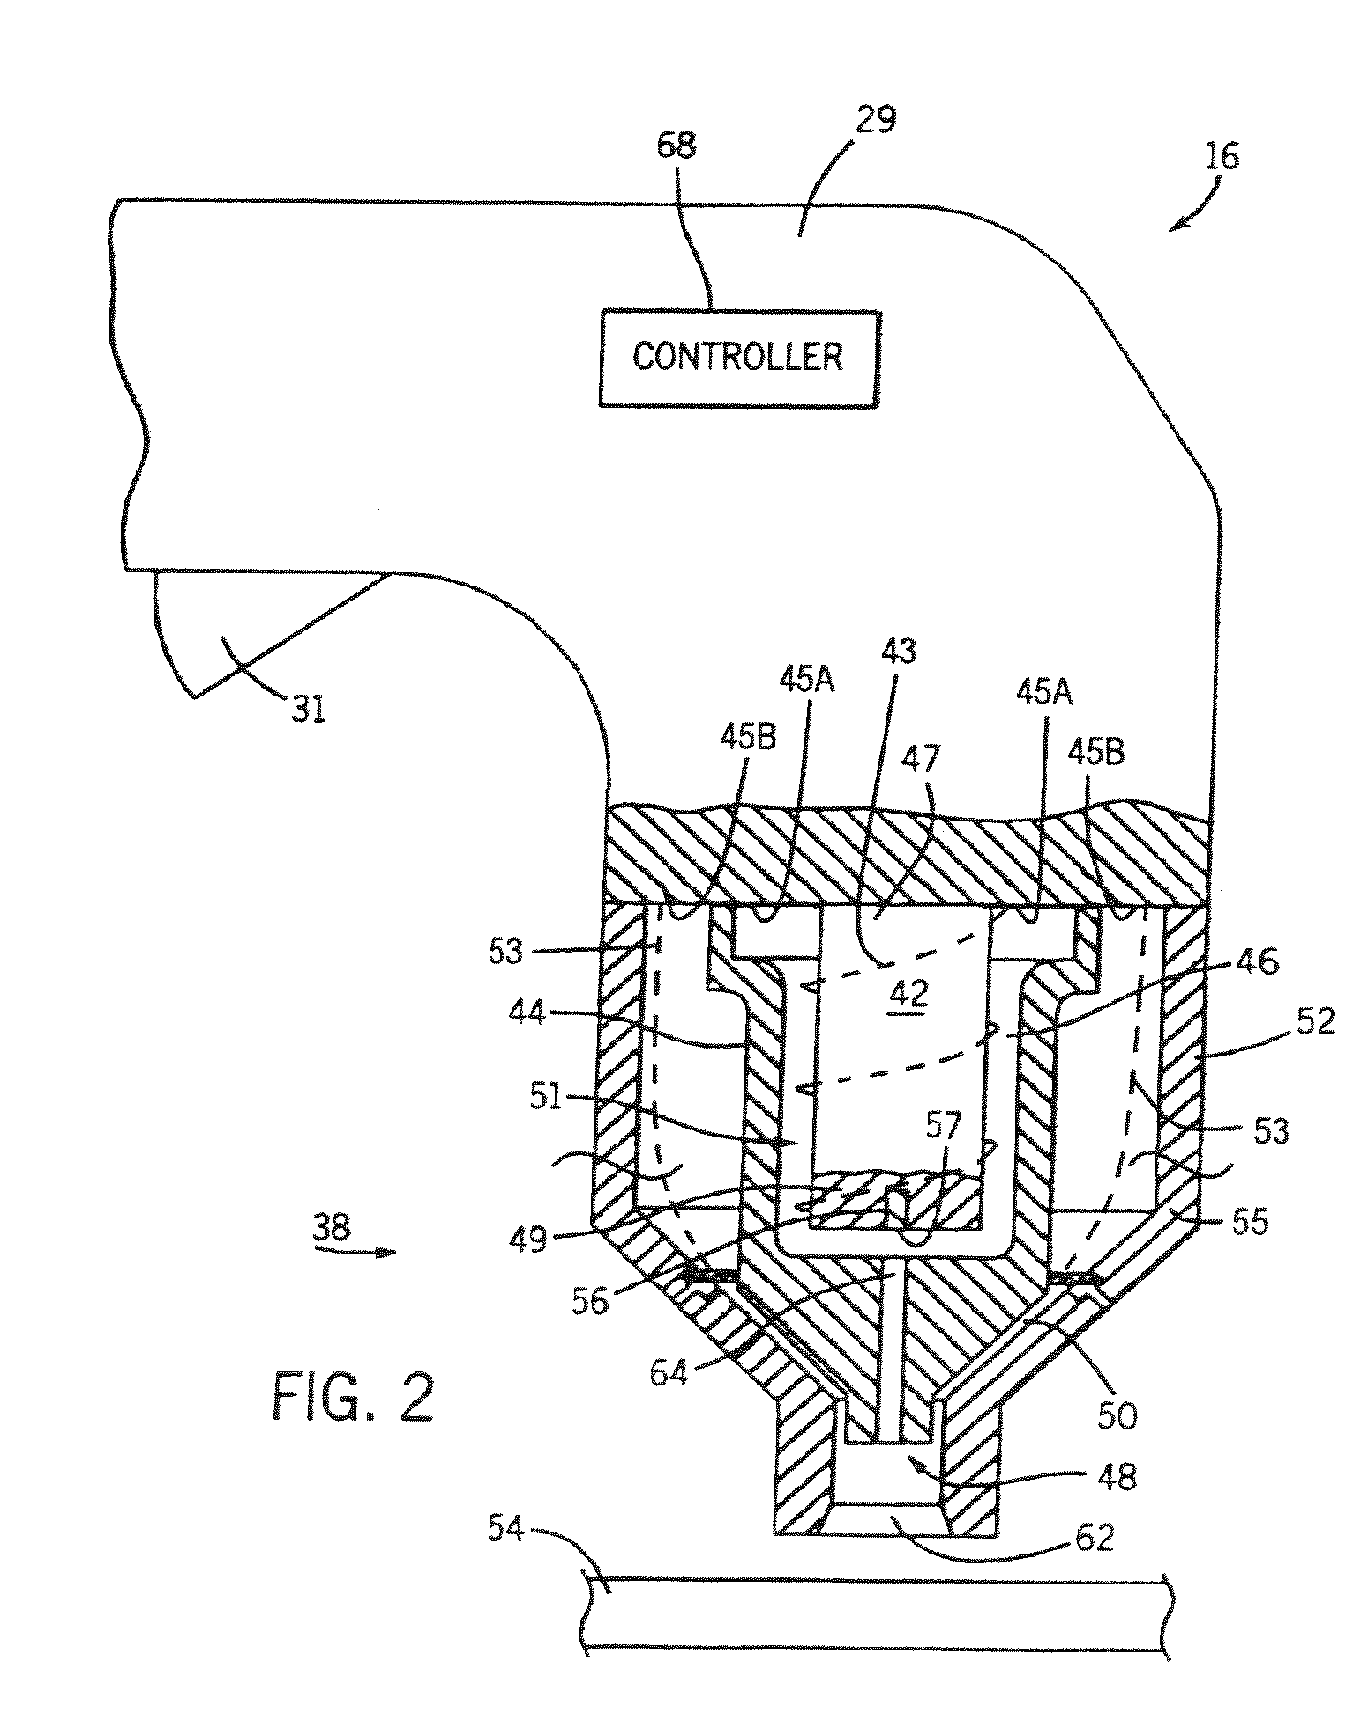 Method and System of Conserving Plasma Torch Consumable